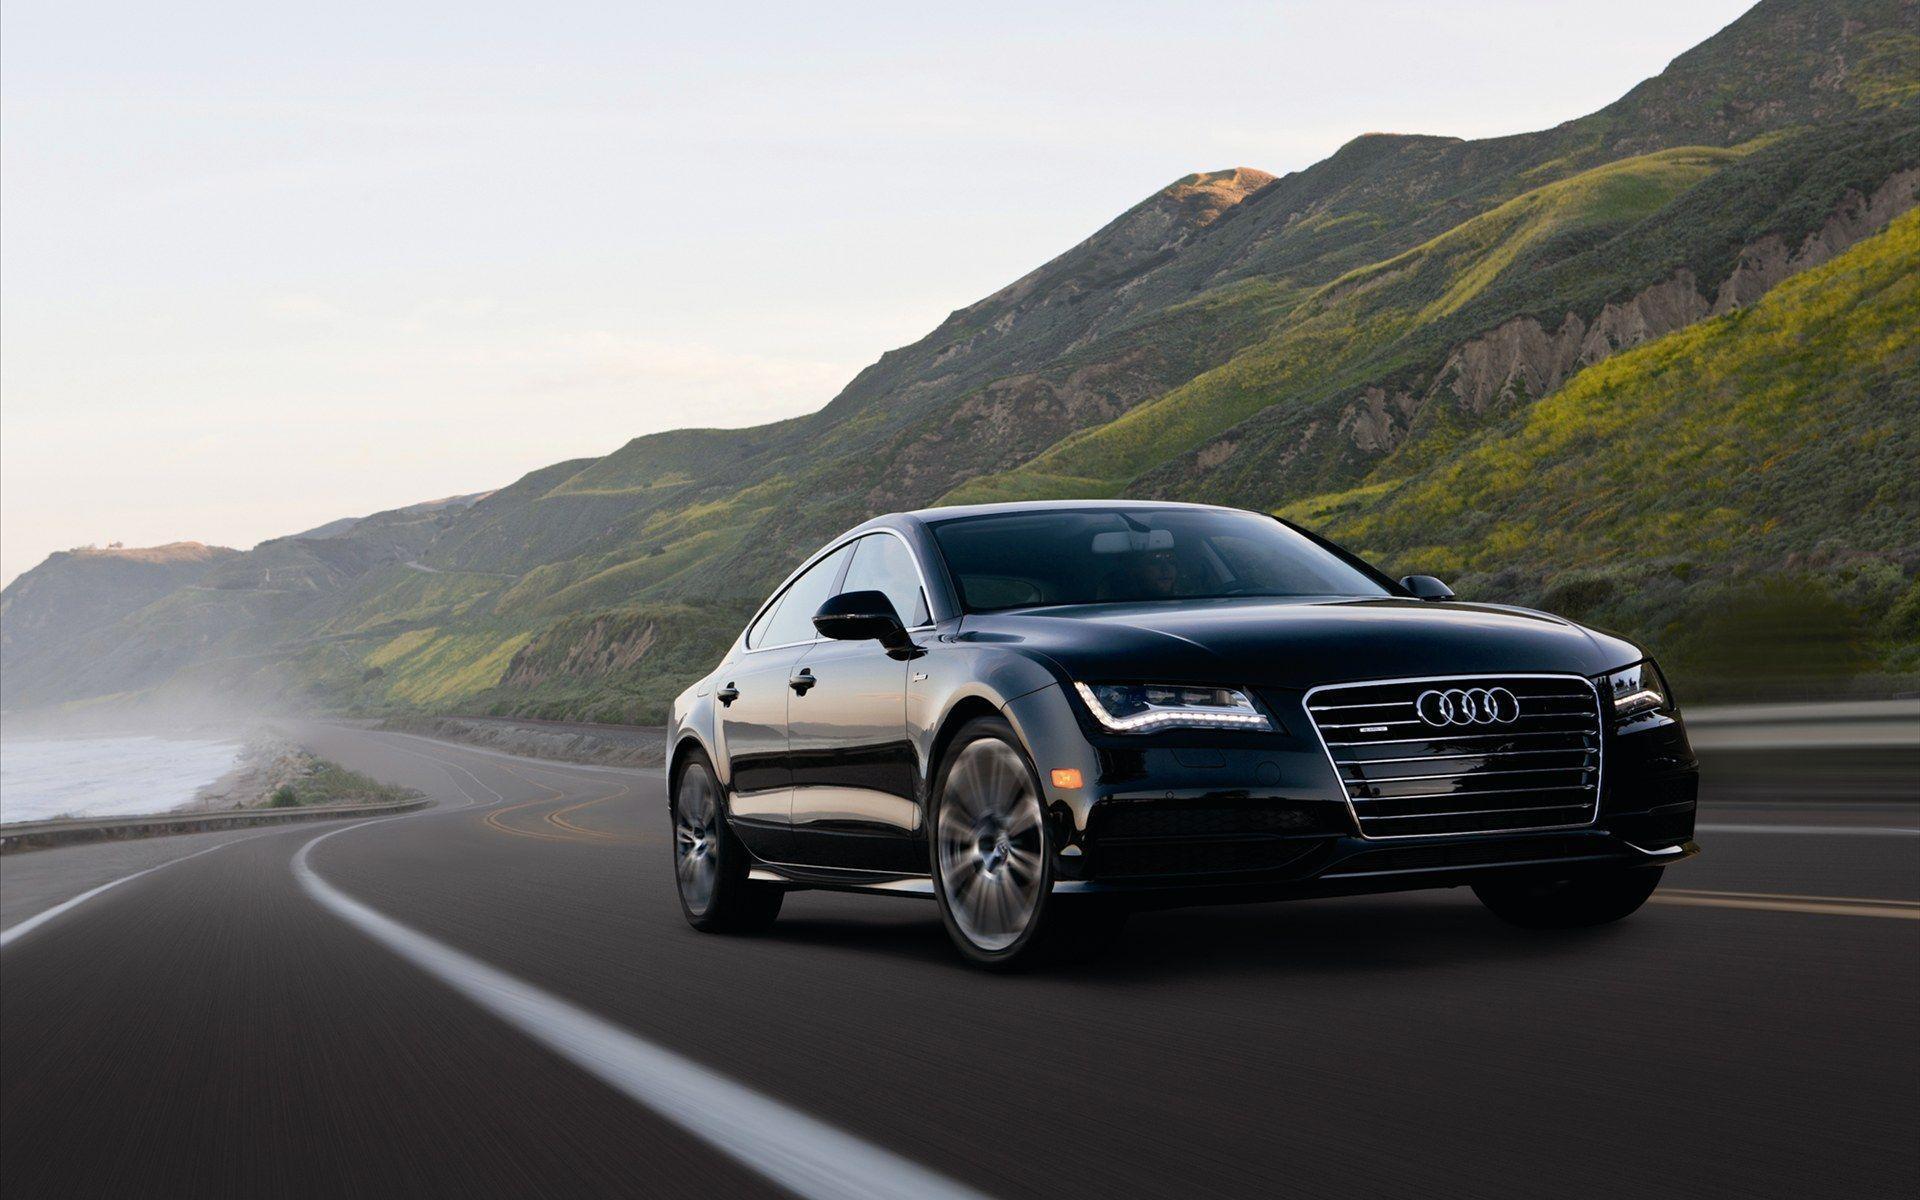 Audi A7 HD Wallpaper Audi A7 high quality and definition, Full H